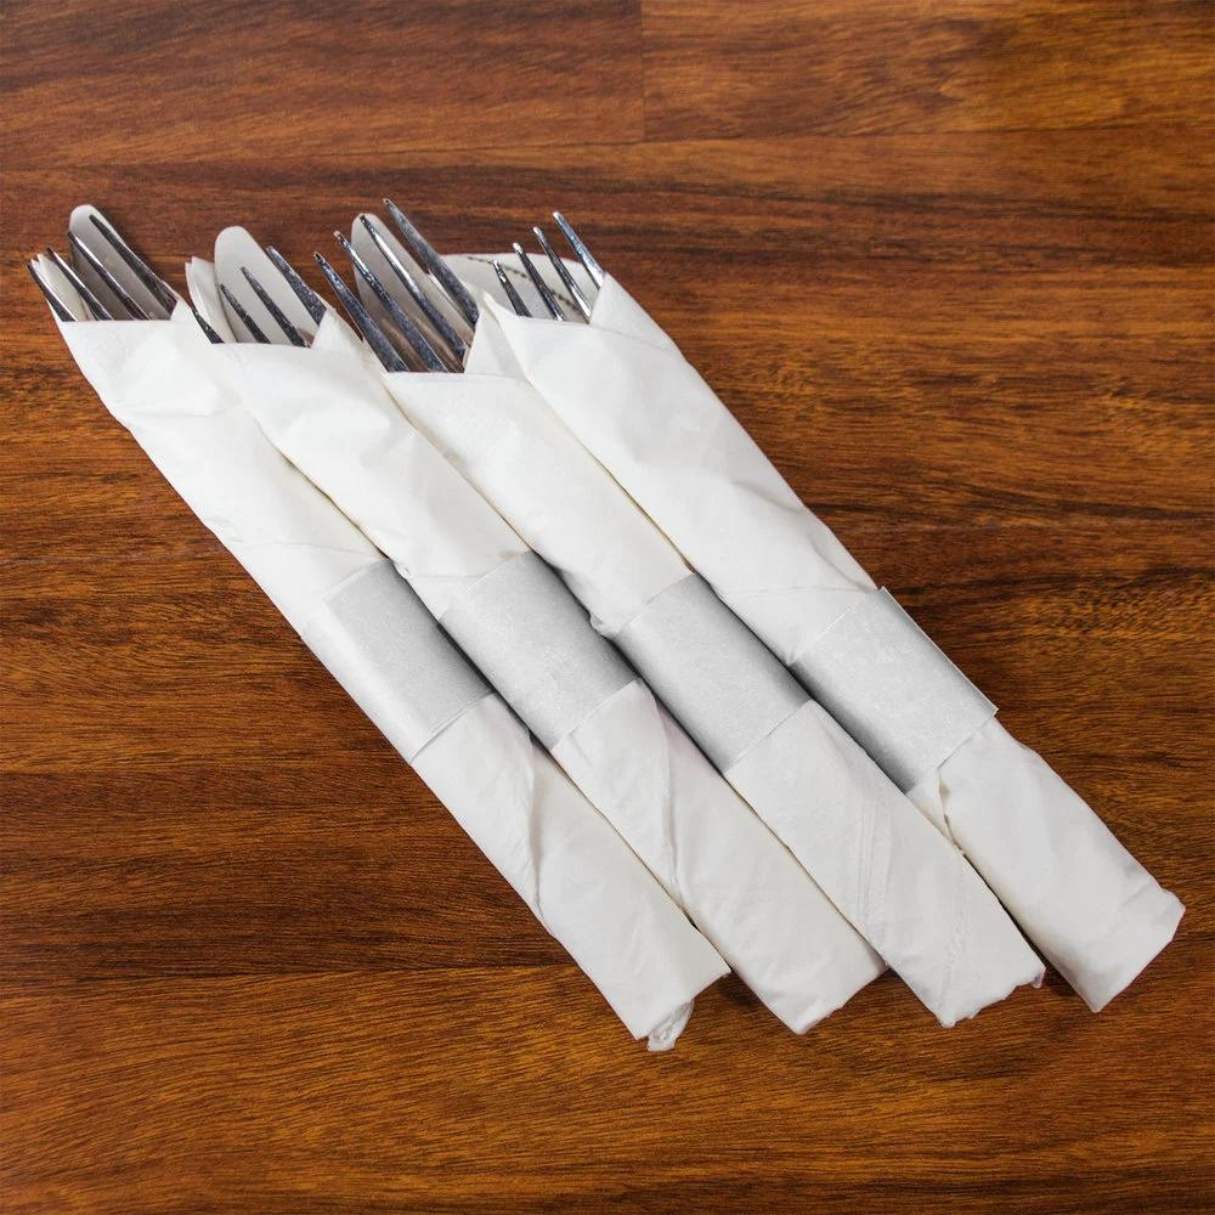 How To Roll Silverware